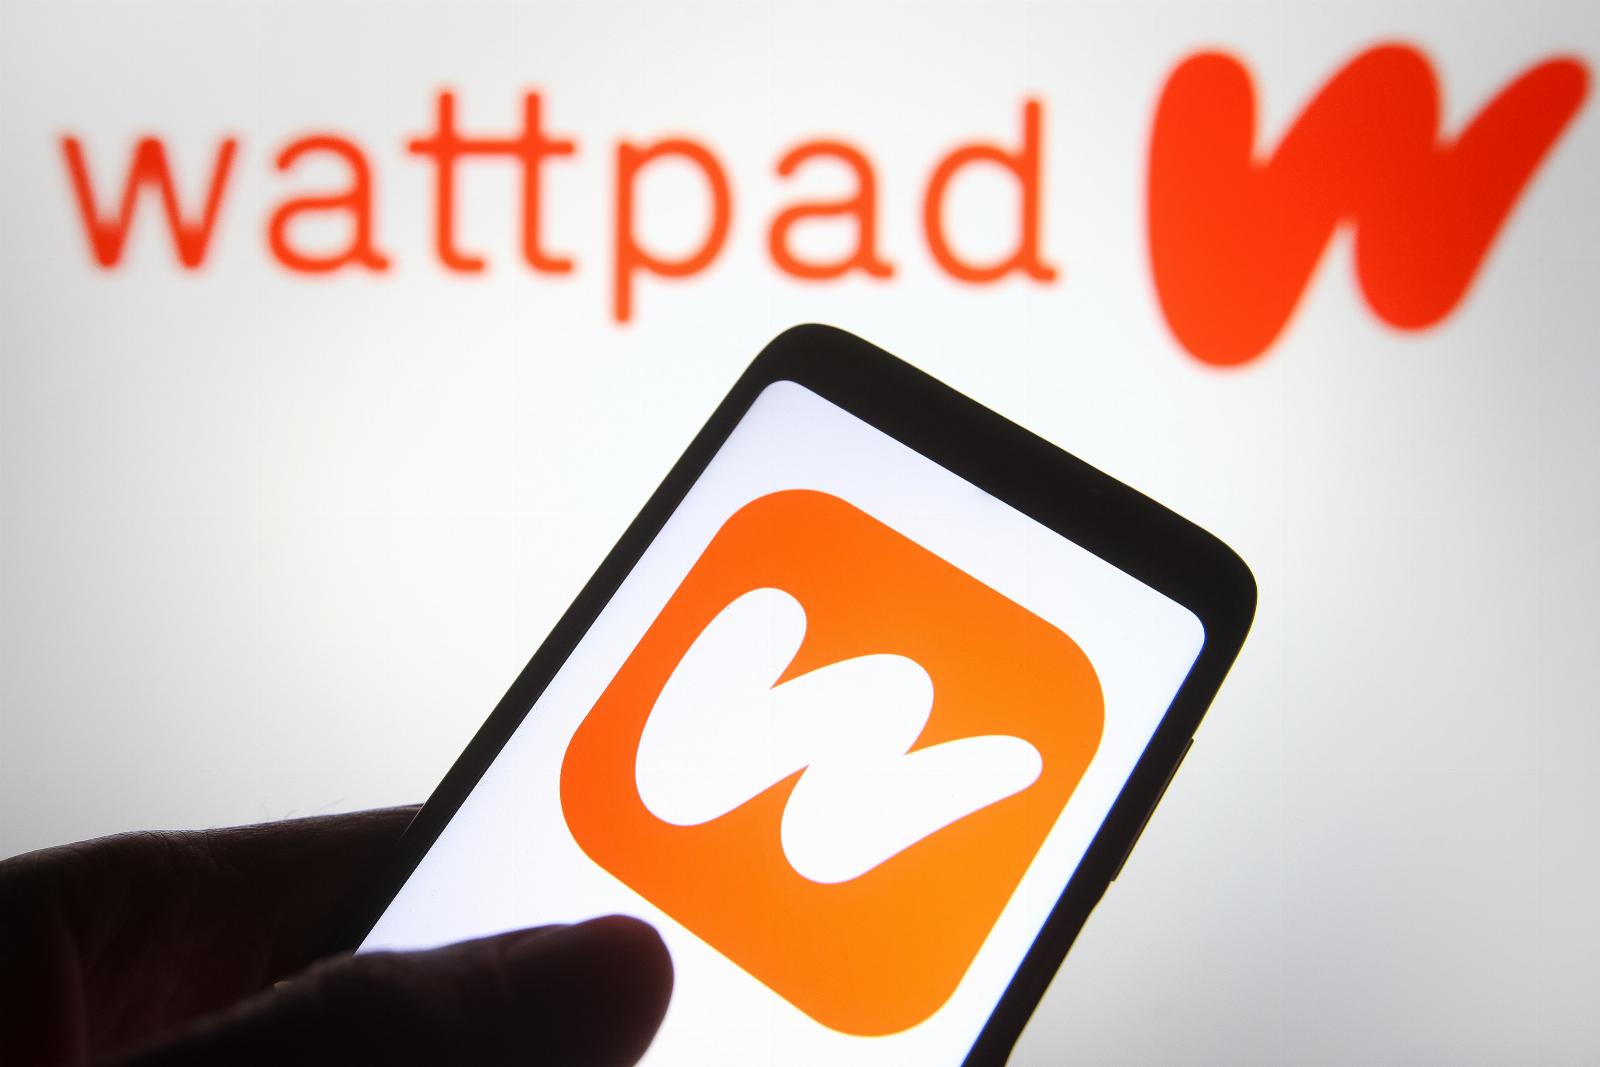 Wattpad is revamping its creator program and making it more accessible